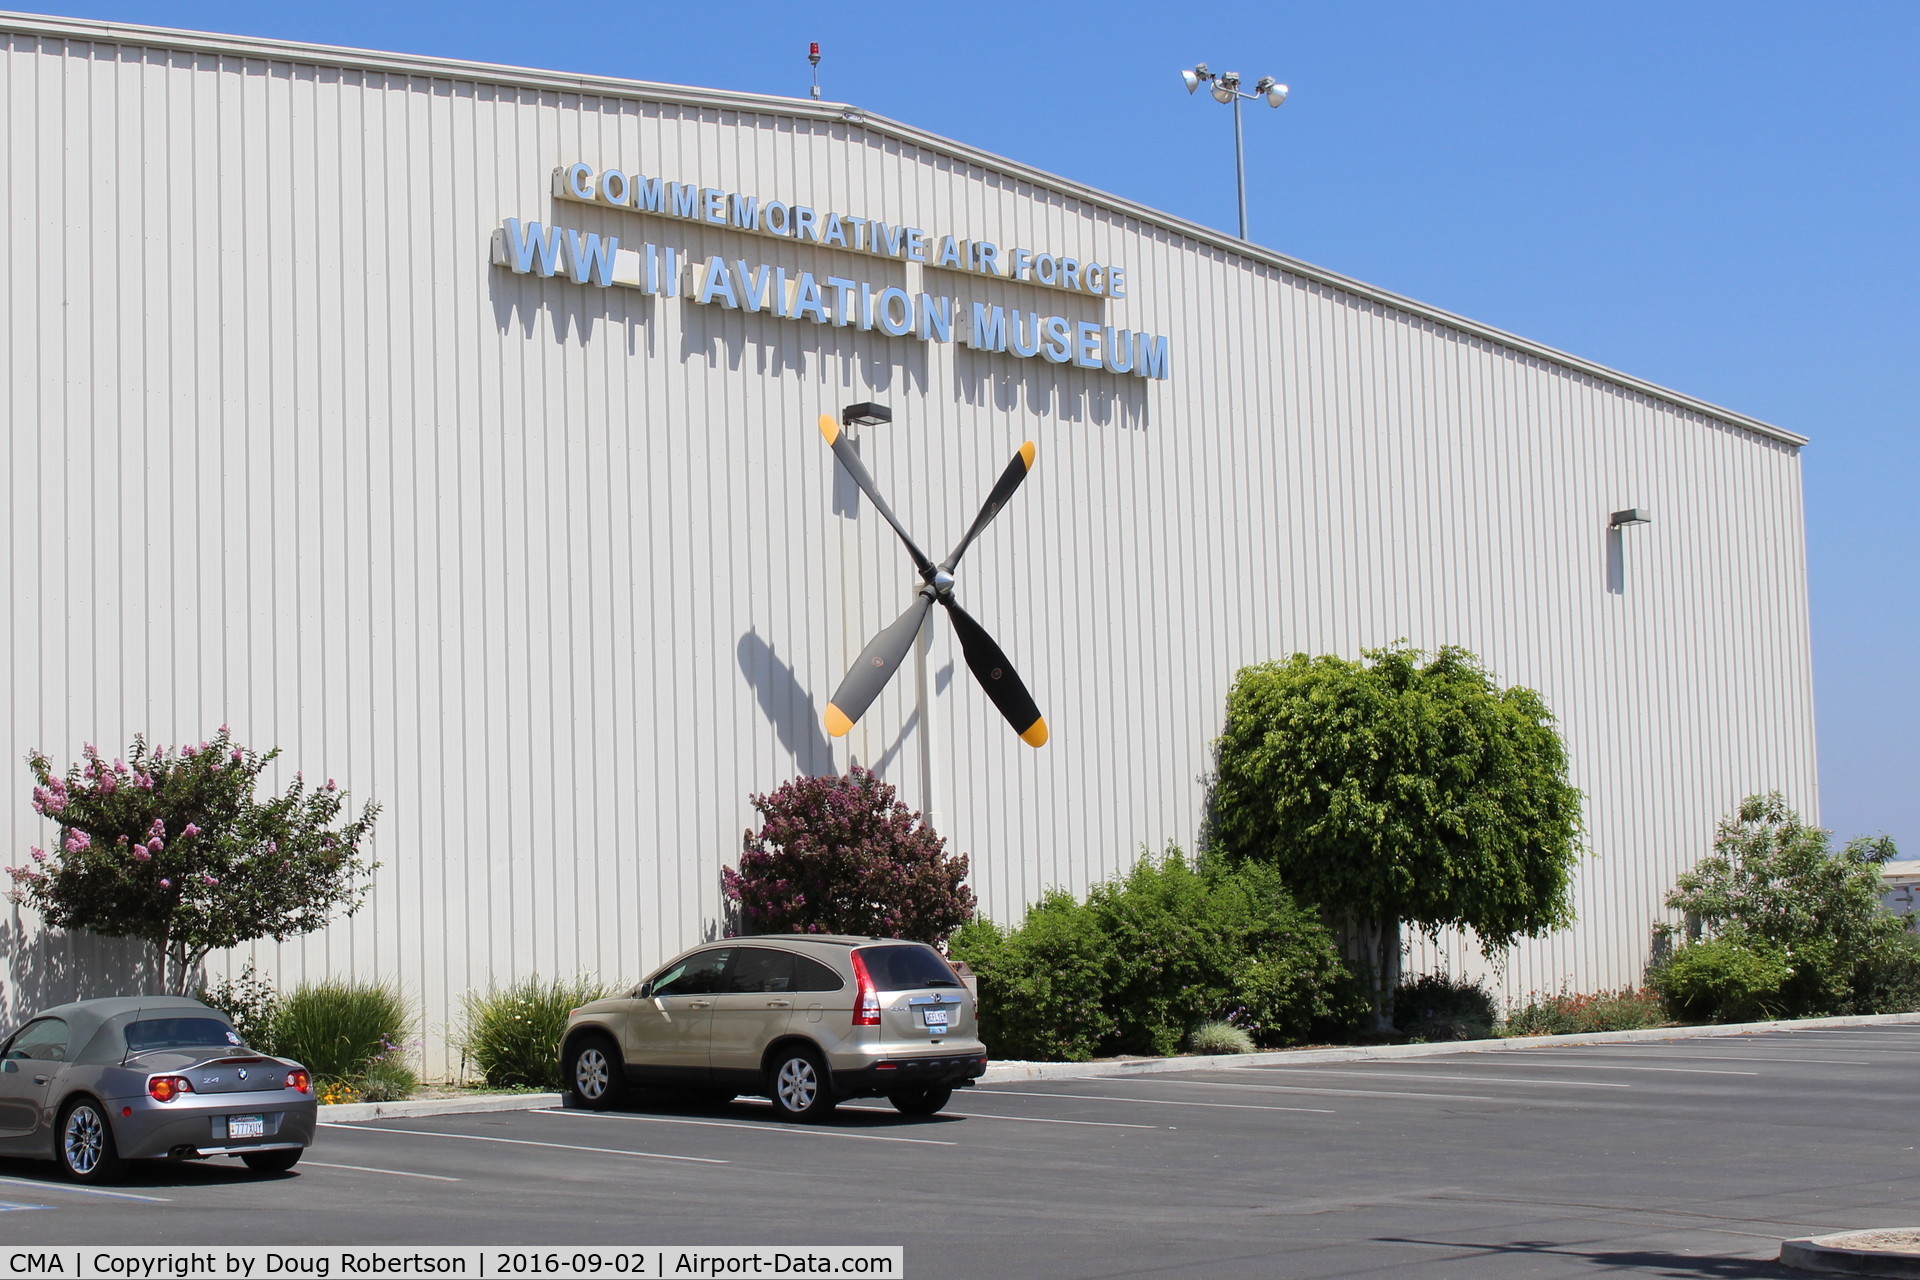 Camarillo Airport (CMA) - Commemorative Air Force-Southern California Wing-their Museum and Store Hangar. Propeller is from a C-130, so told.